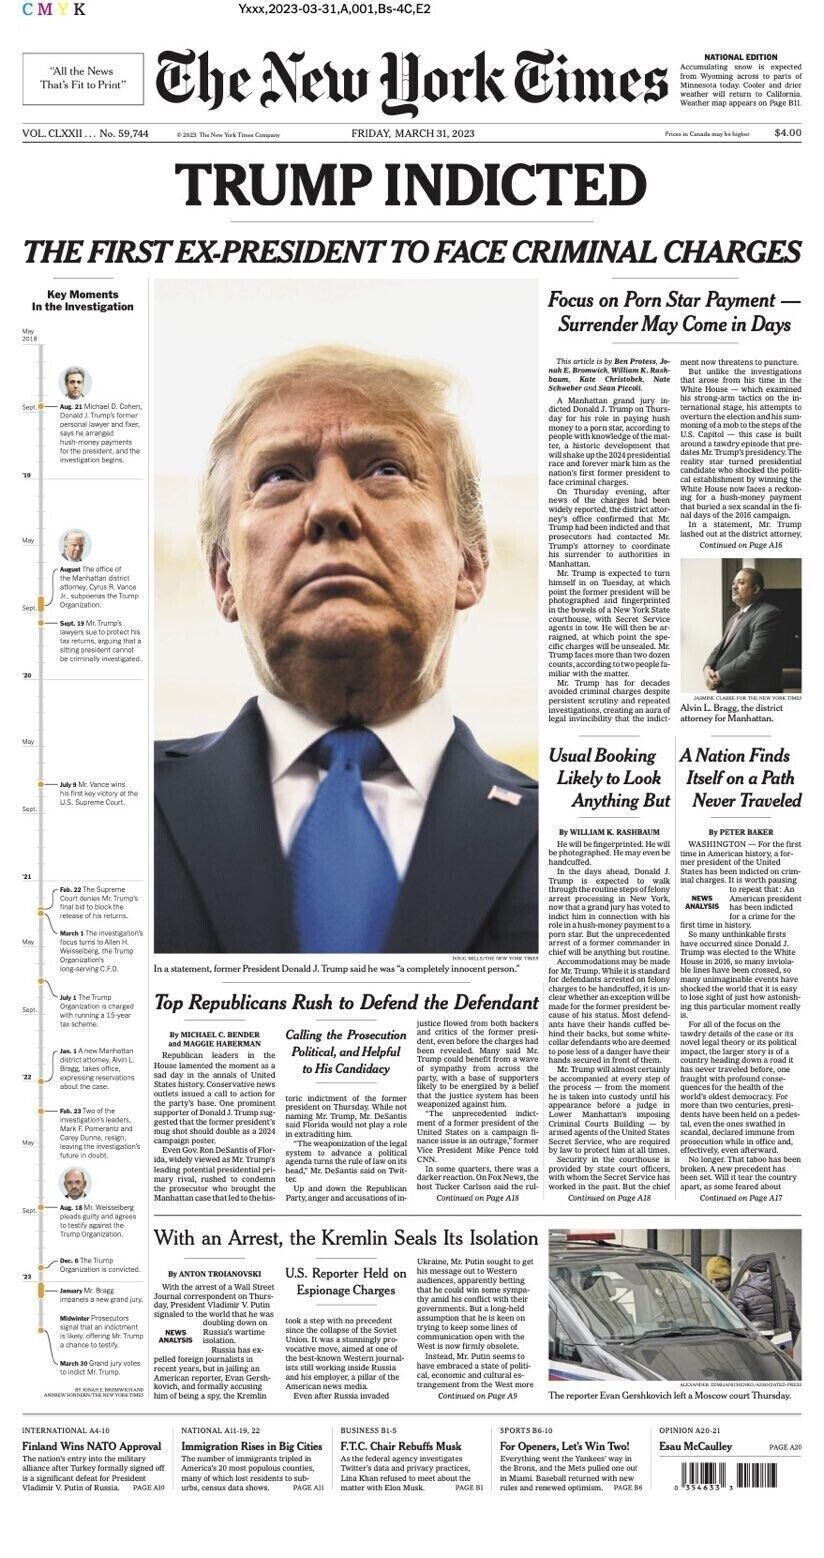 DONALD TRUMP INDICTED - New York Times Newspaper Friday March 31, 2023 NEW